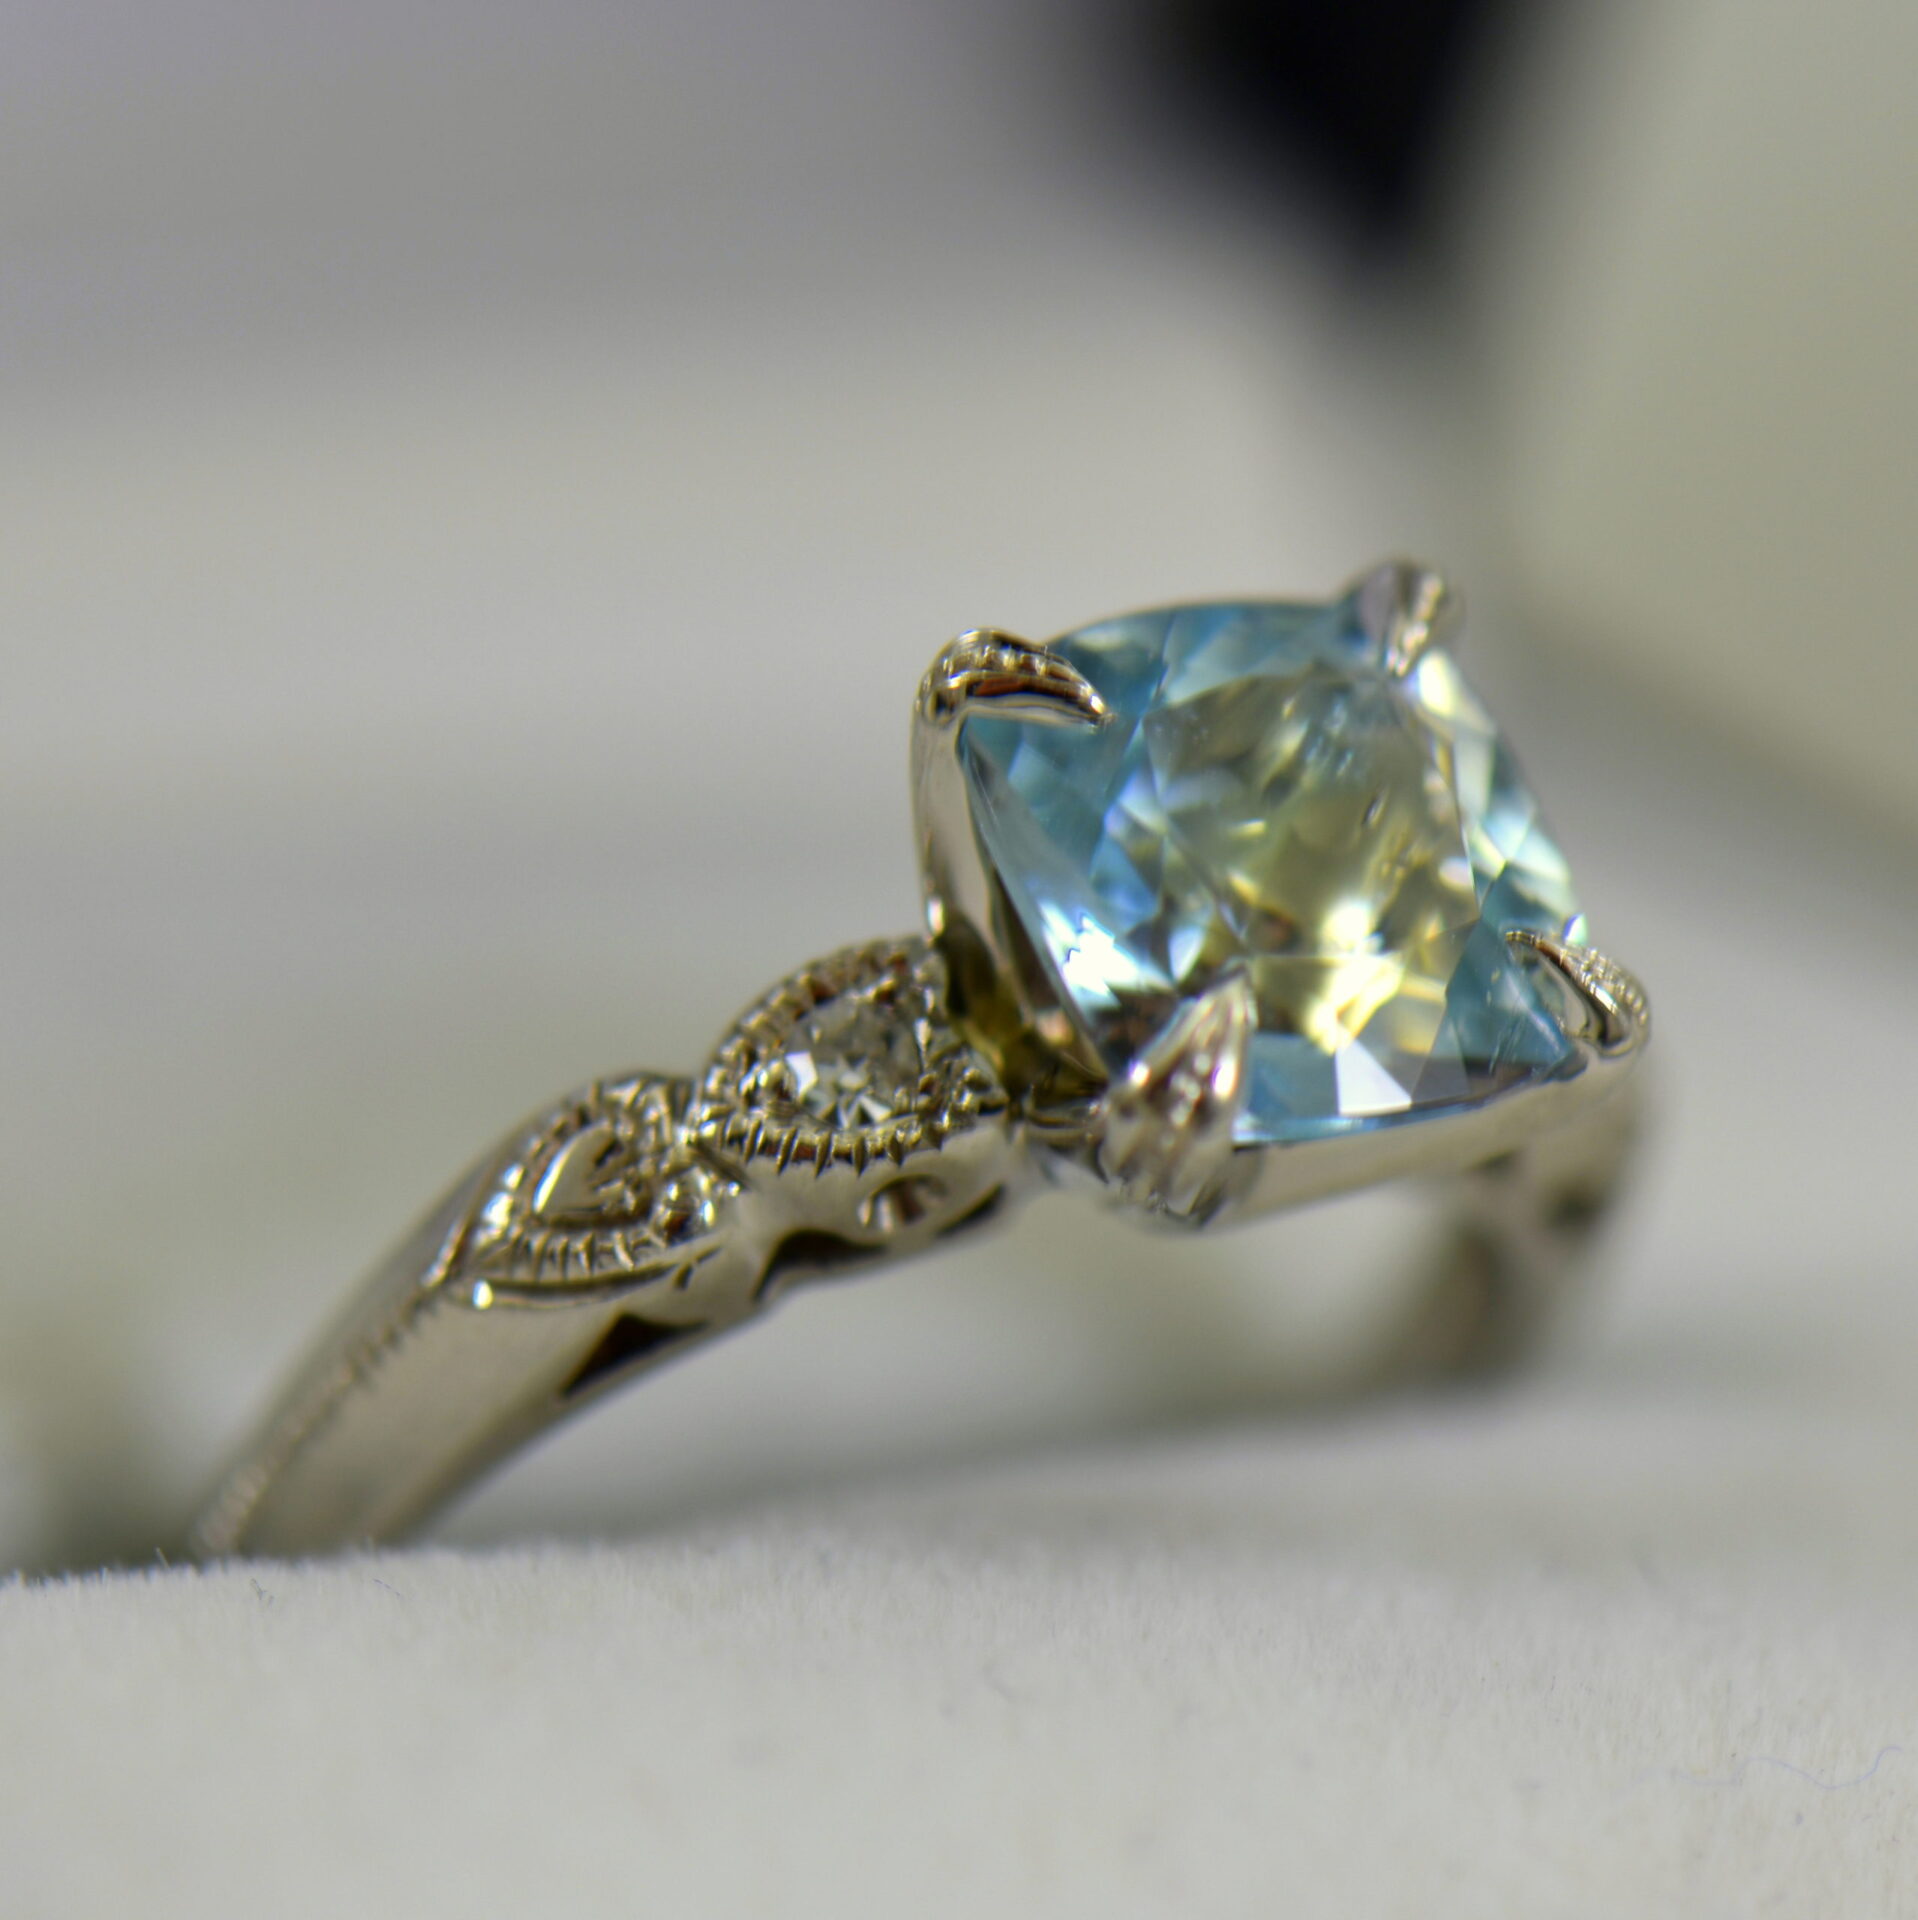 From the top, this aquamarine engagement ring looks like the perfect  contempo… | Beautiful jewelry ring, Colored gemstone engagement ring,  Gemstone engagement rings